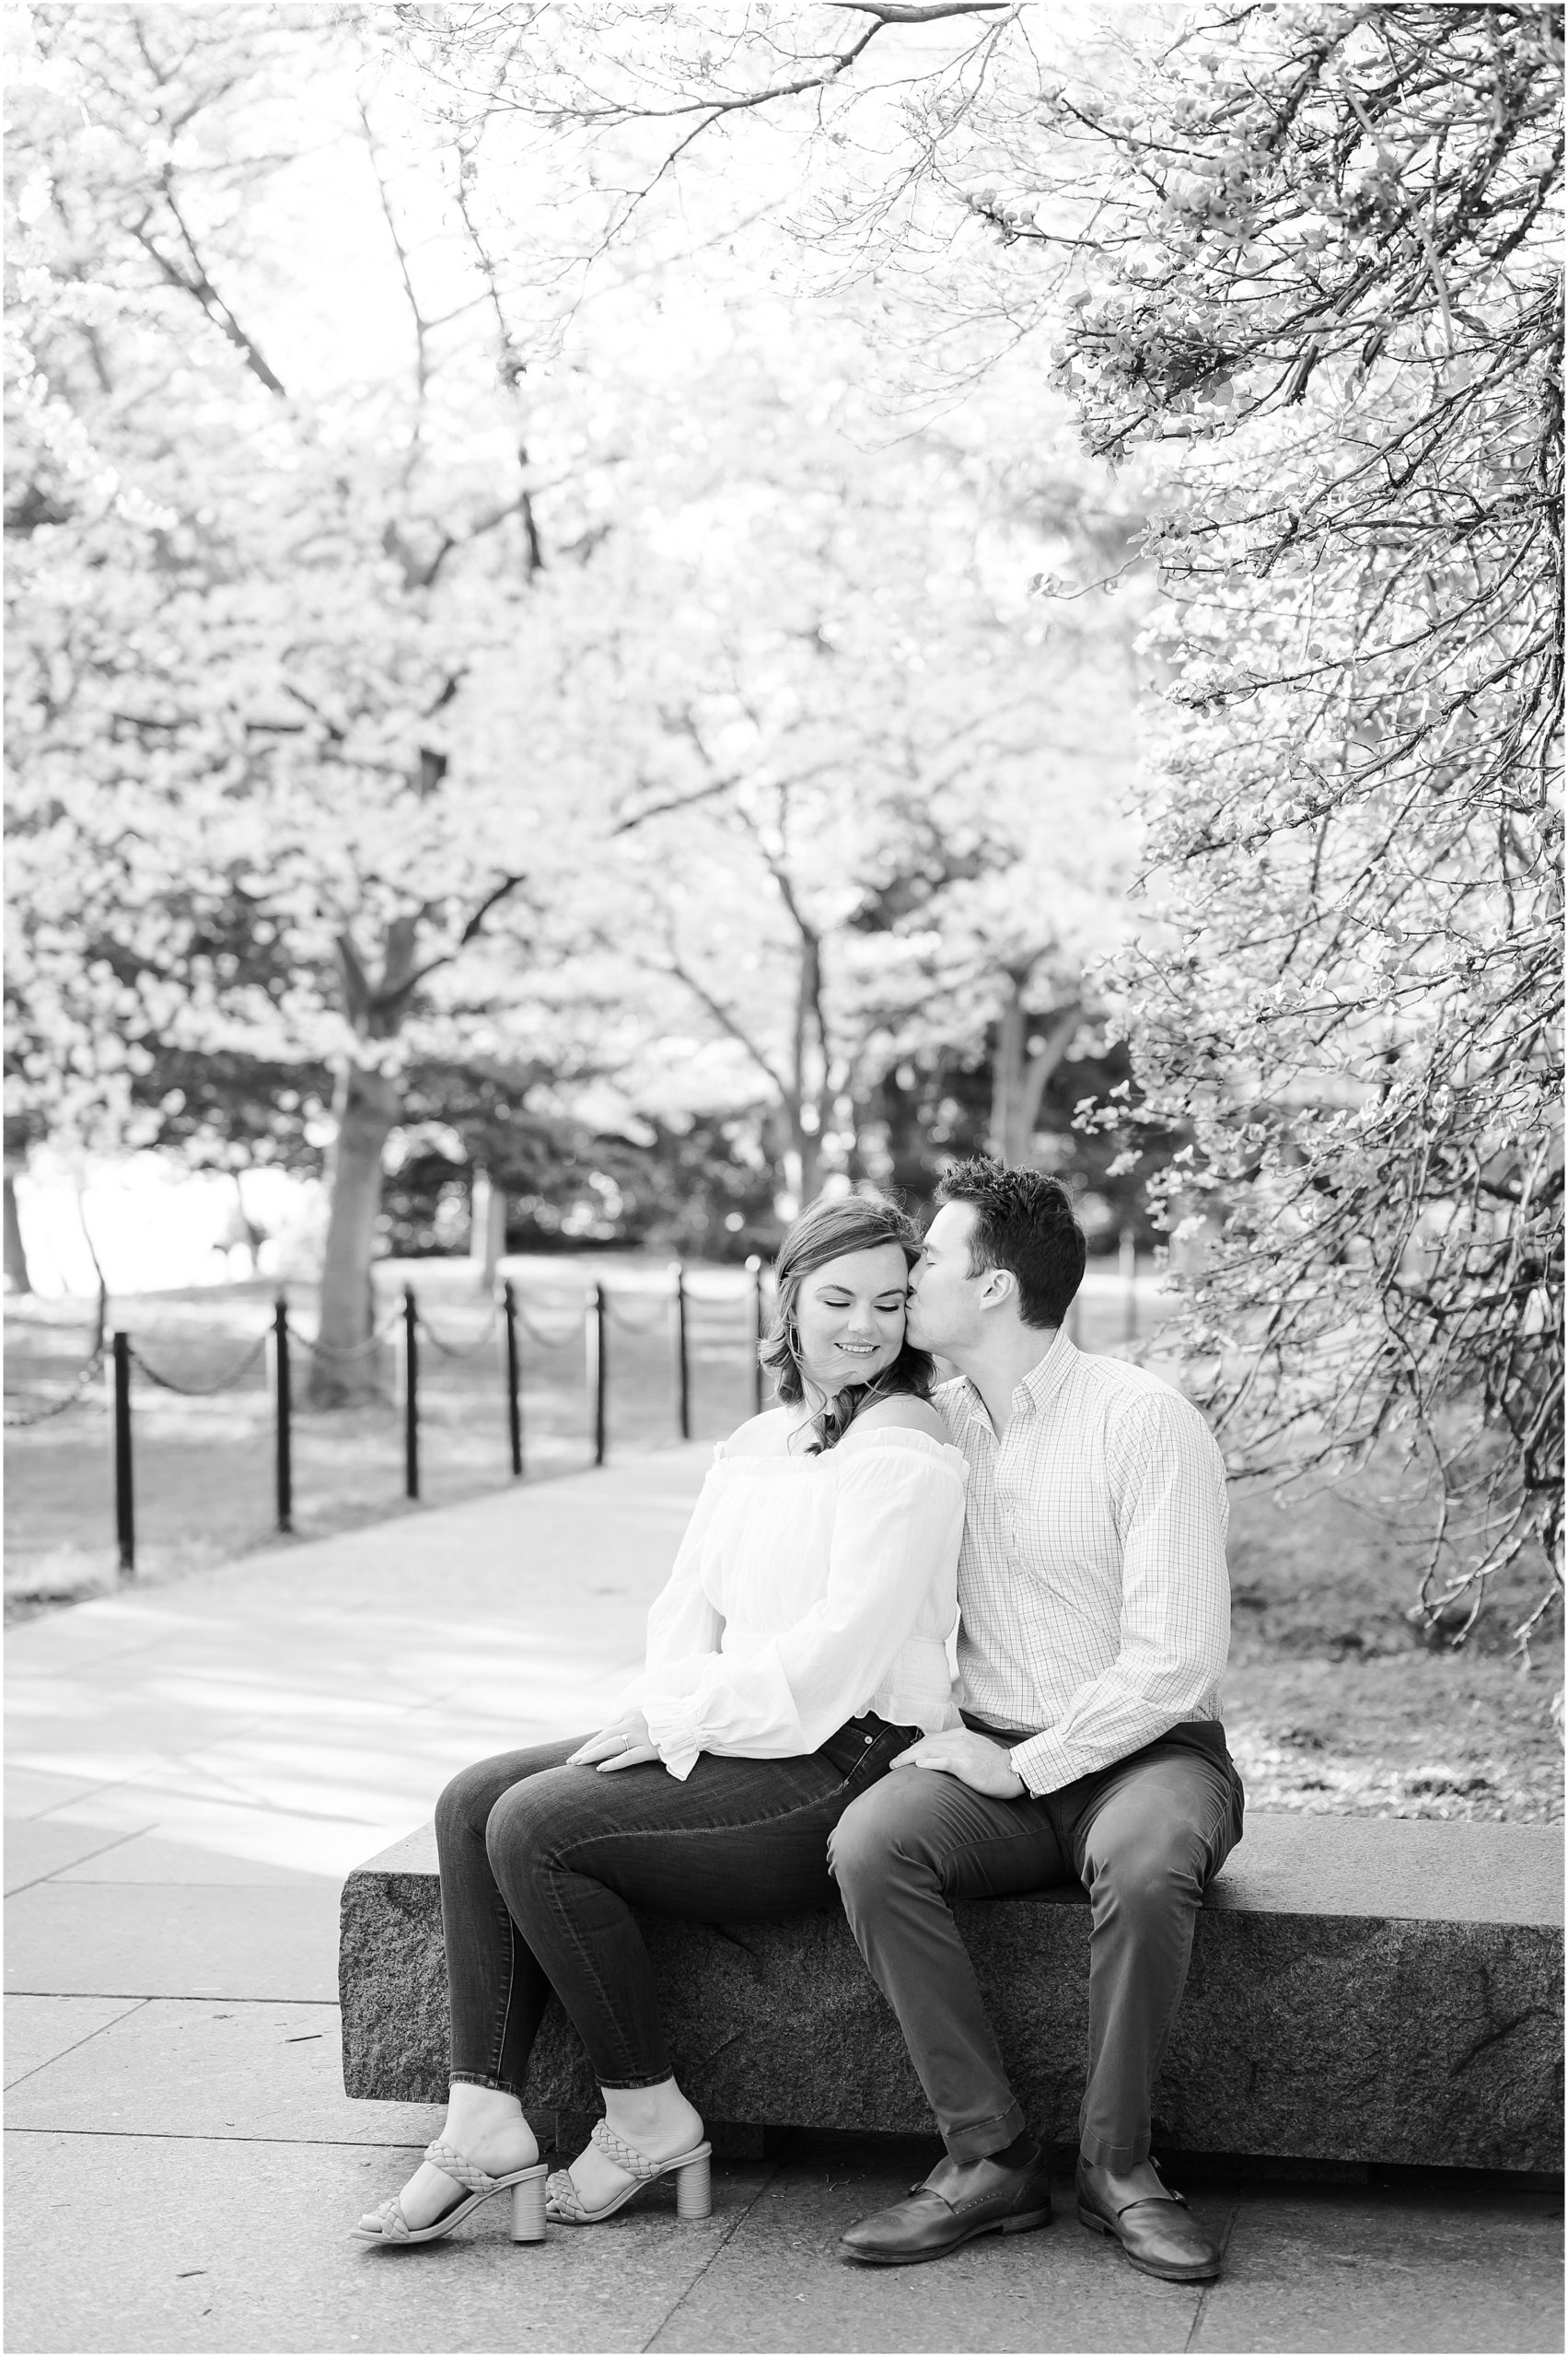 Engagement session in Washington D.C. during cherry blossoms